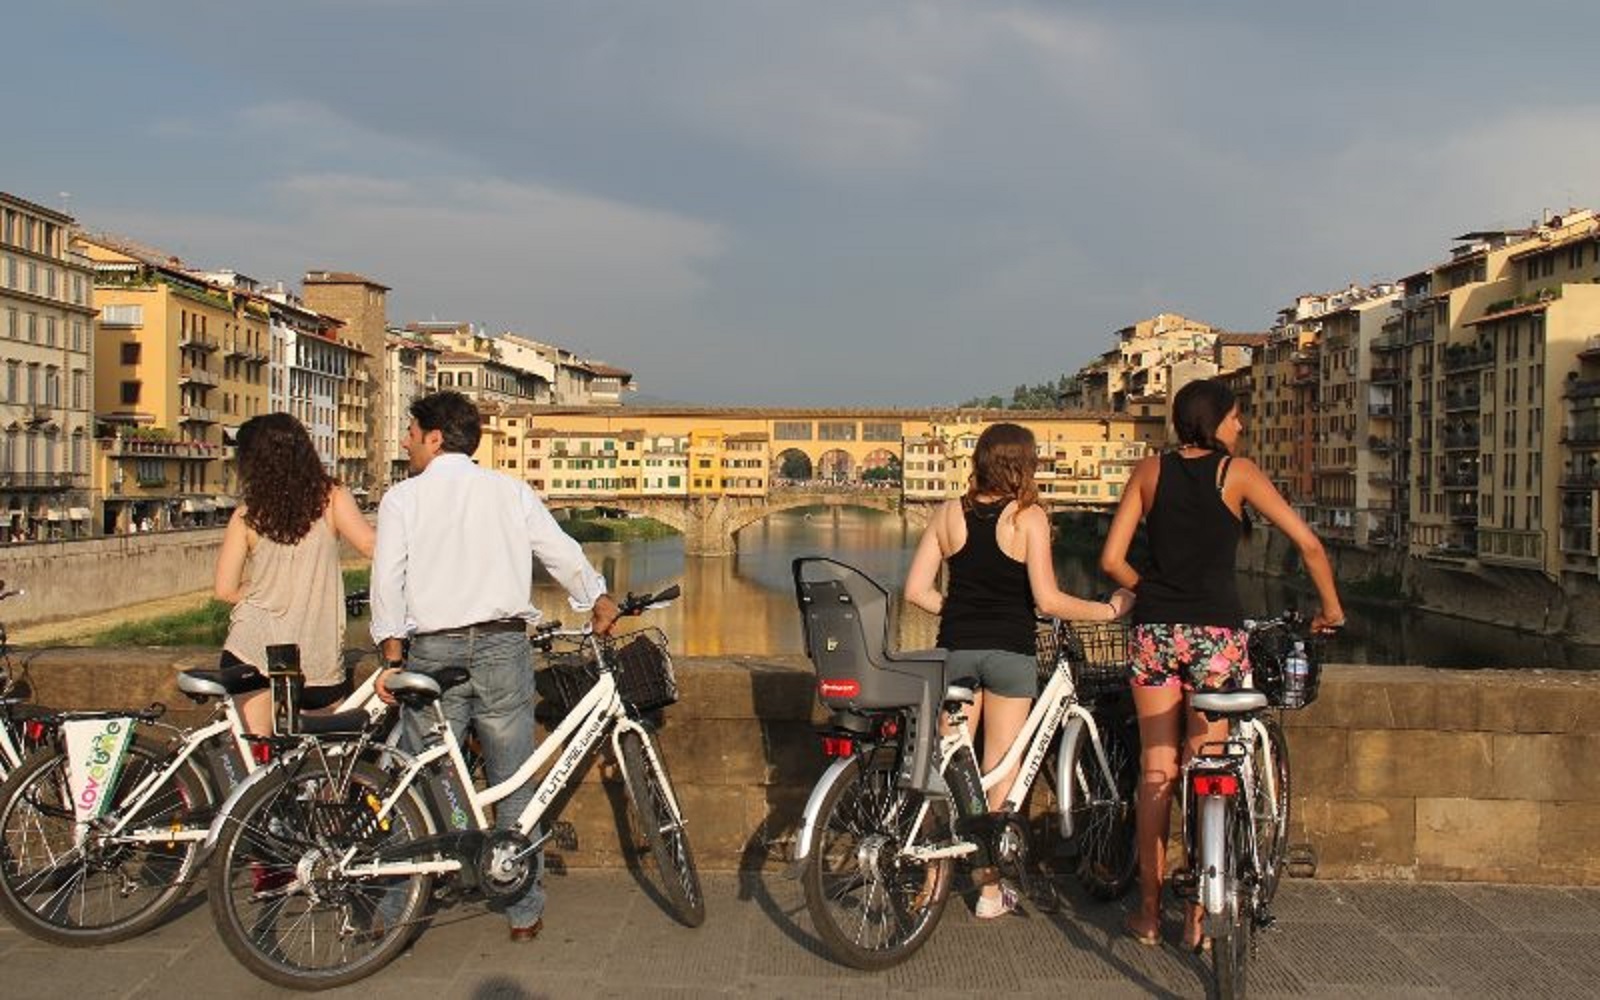 Experience Florence from a different perspective on a 2-hour bike tour of its iconic sights